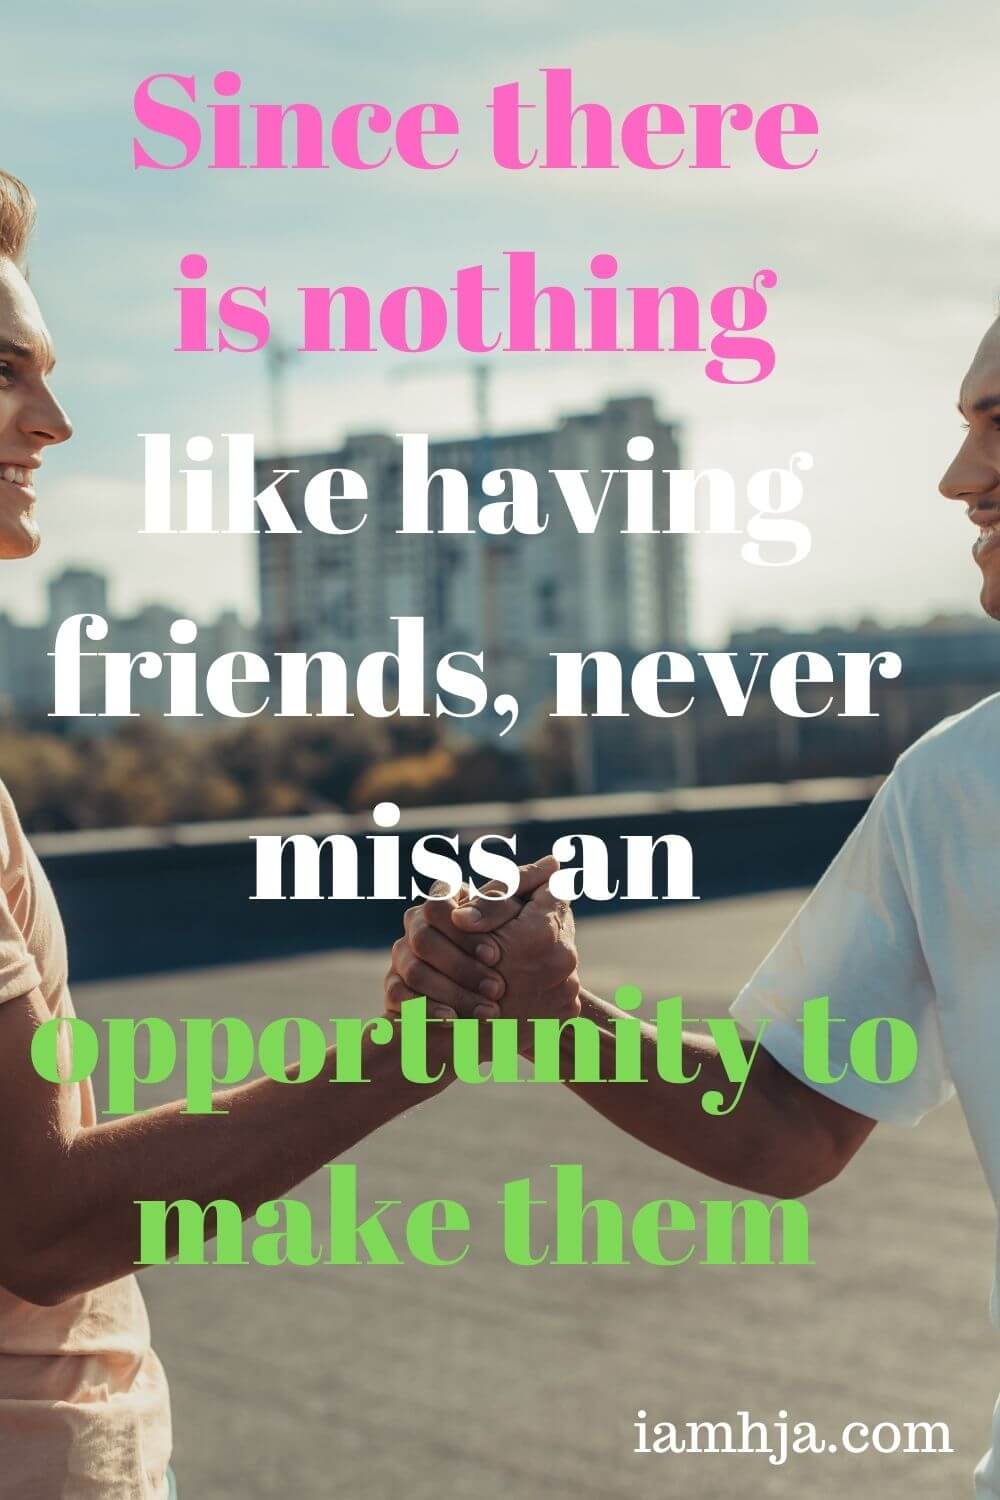 Since there is nothing like having friends, never miss an opportunity to make them